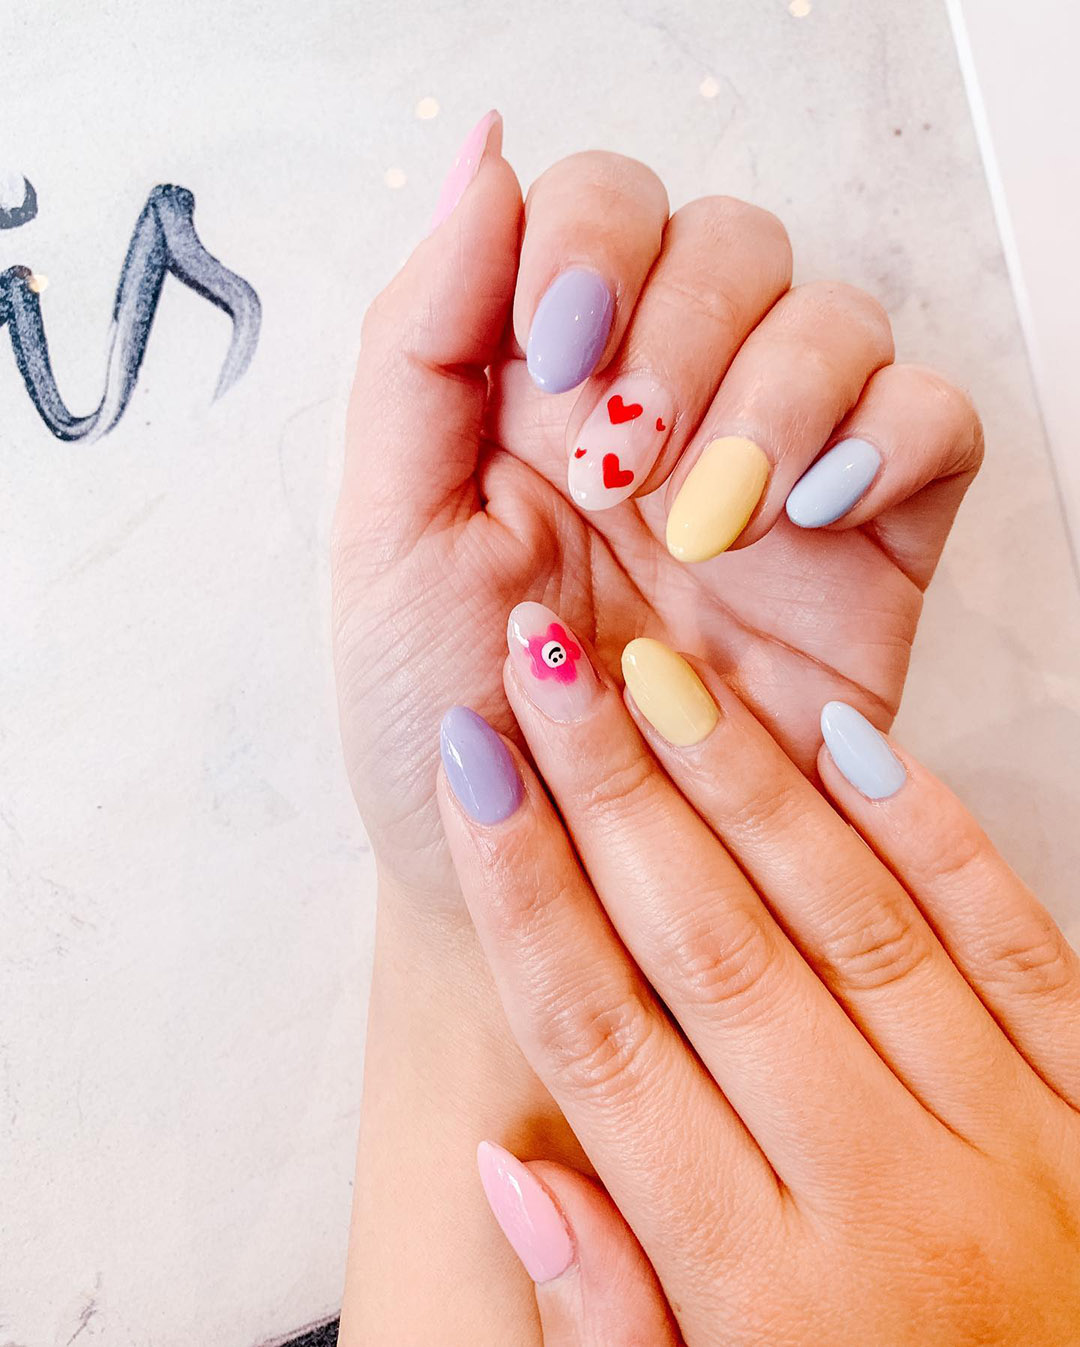 nail art with youthful valentines design.